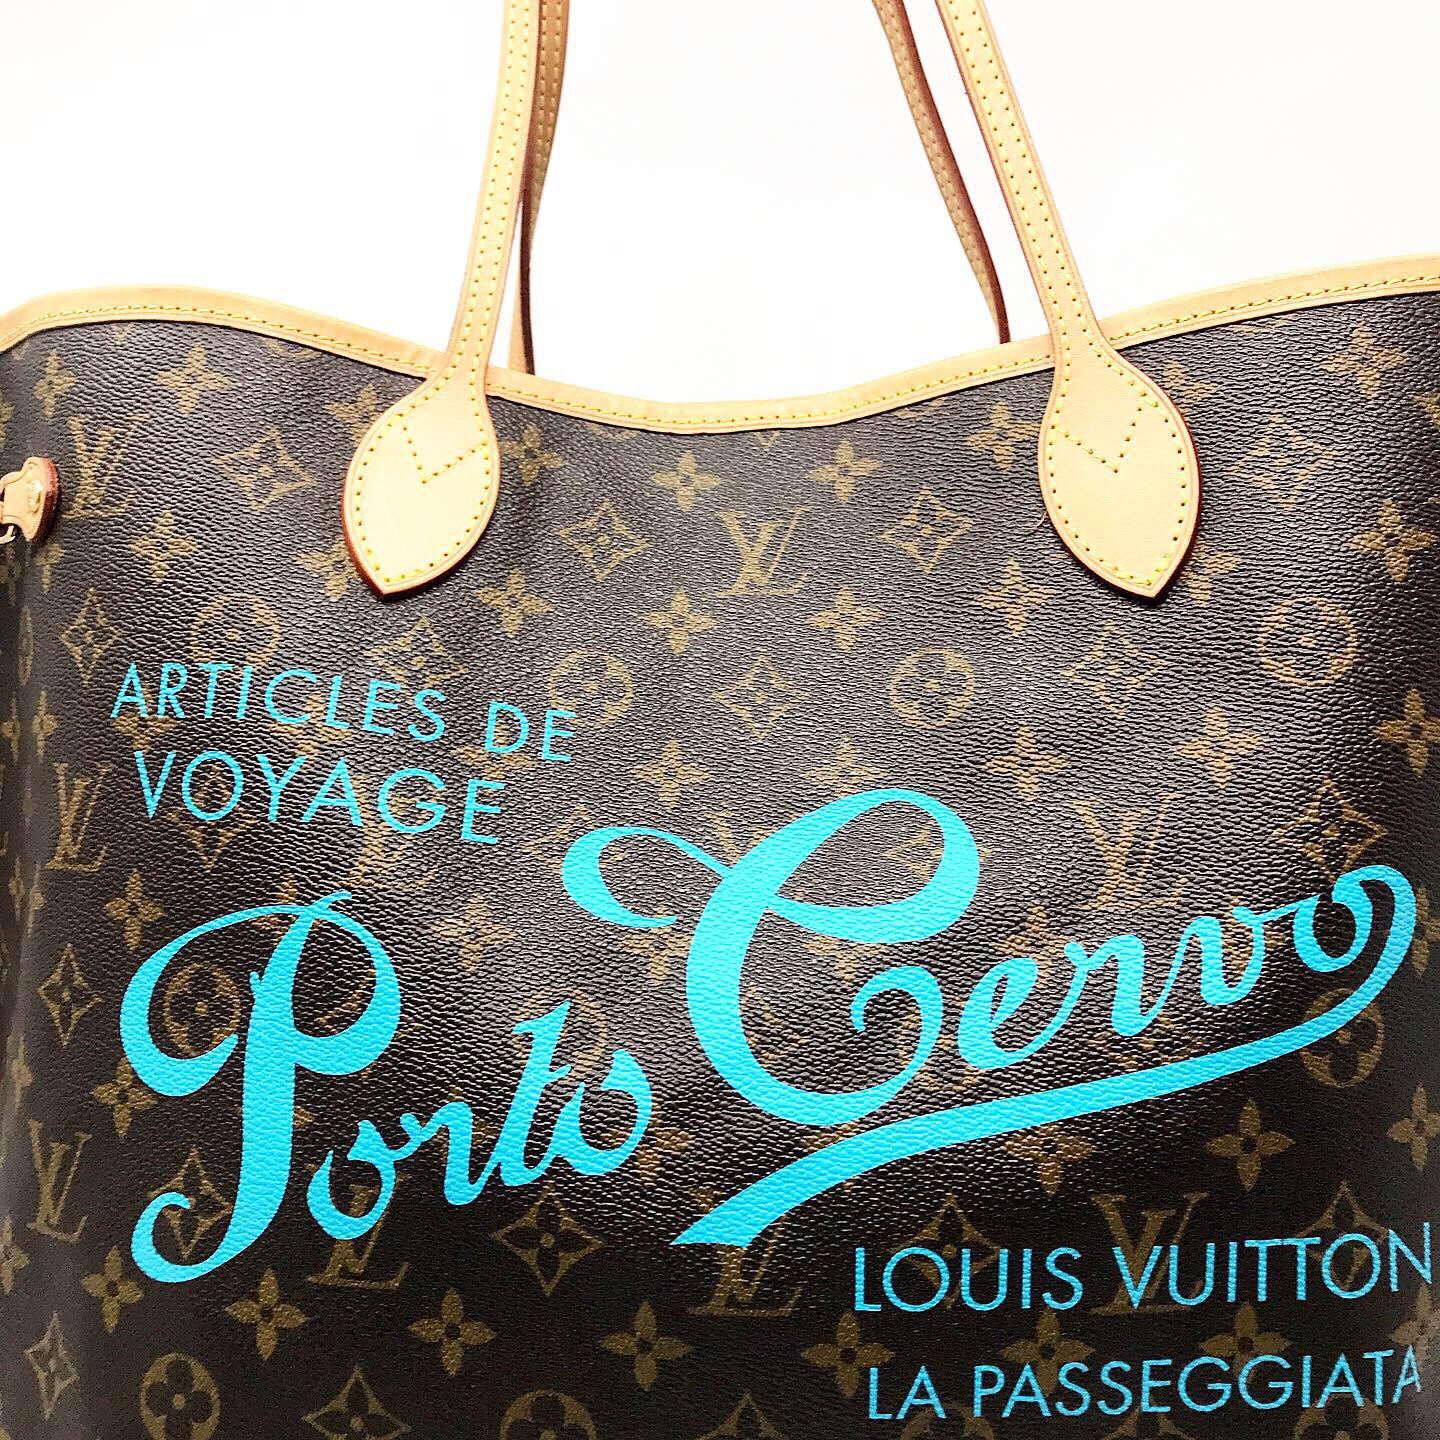 These are very exclusive limited edition pieces, just think that the Neverfull Porto Cervo, the model that certainly concerns us most closely, was produced in a limited edition of only 500 pieces. You will notice on the bag the elegant serigraphy